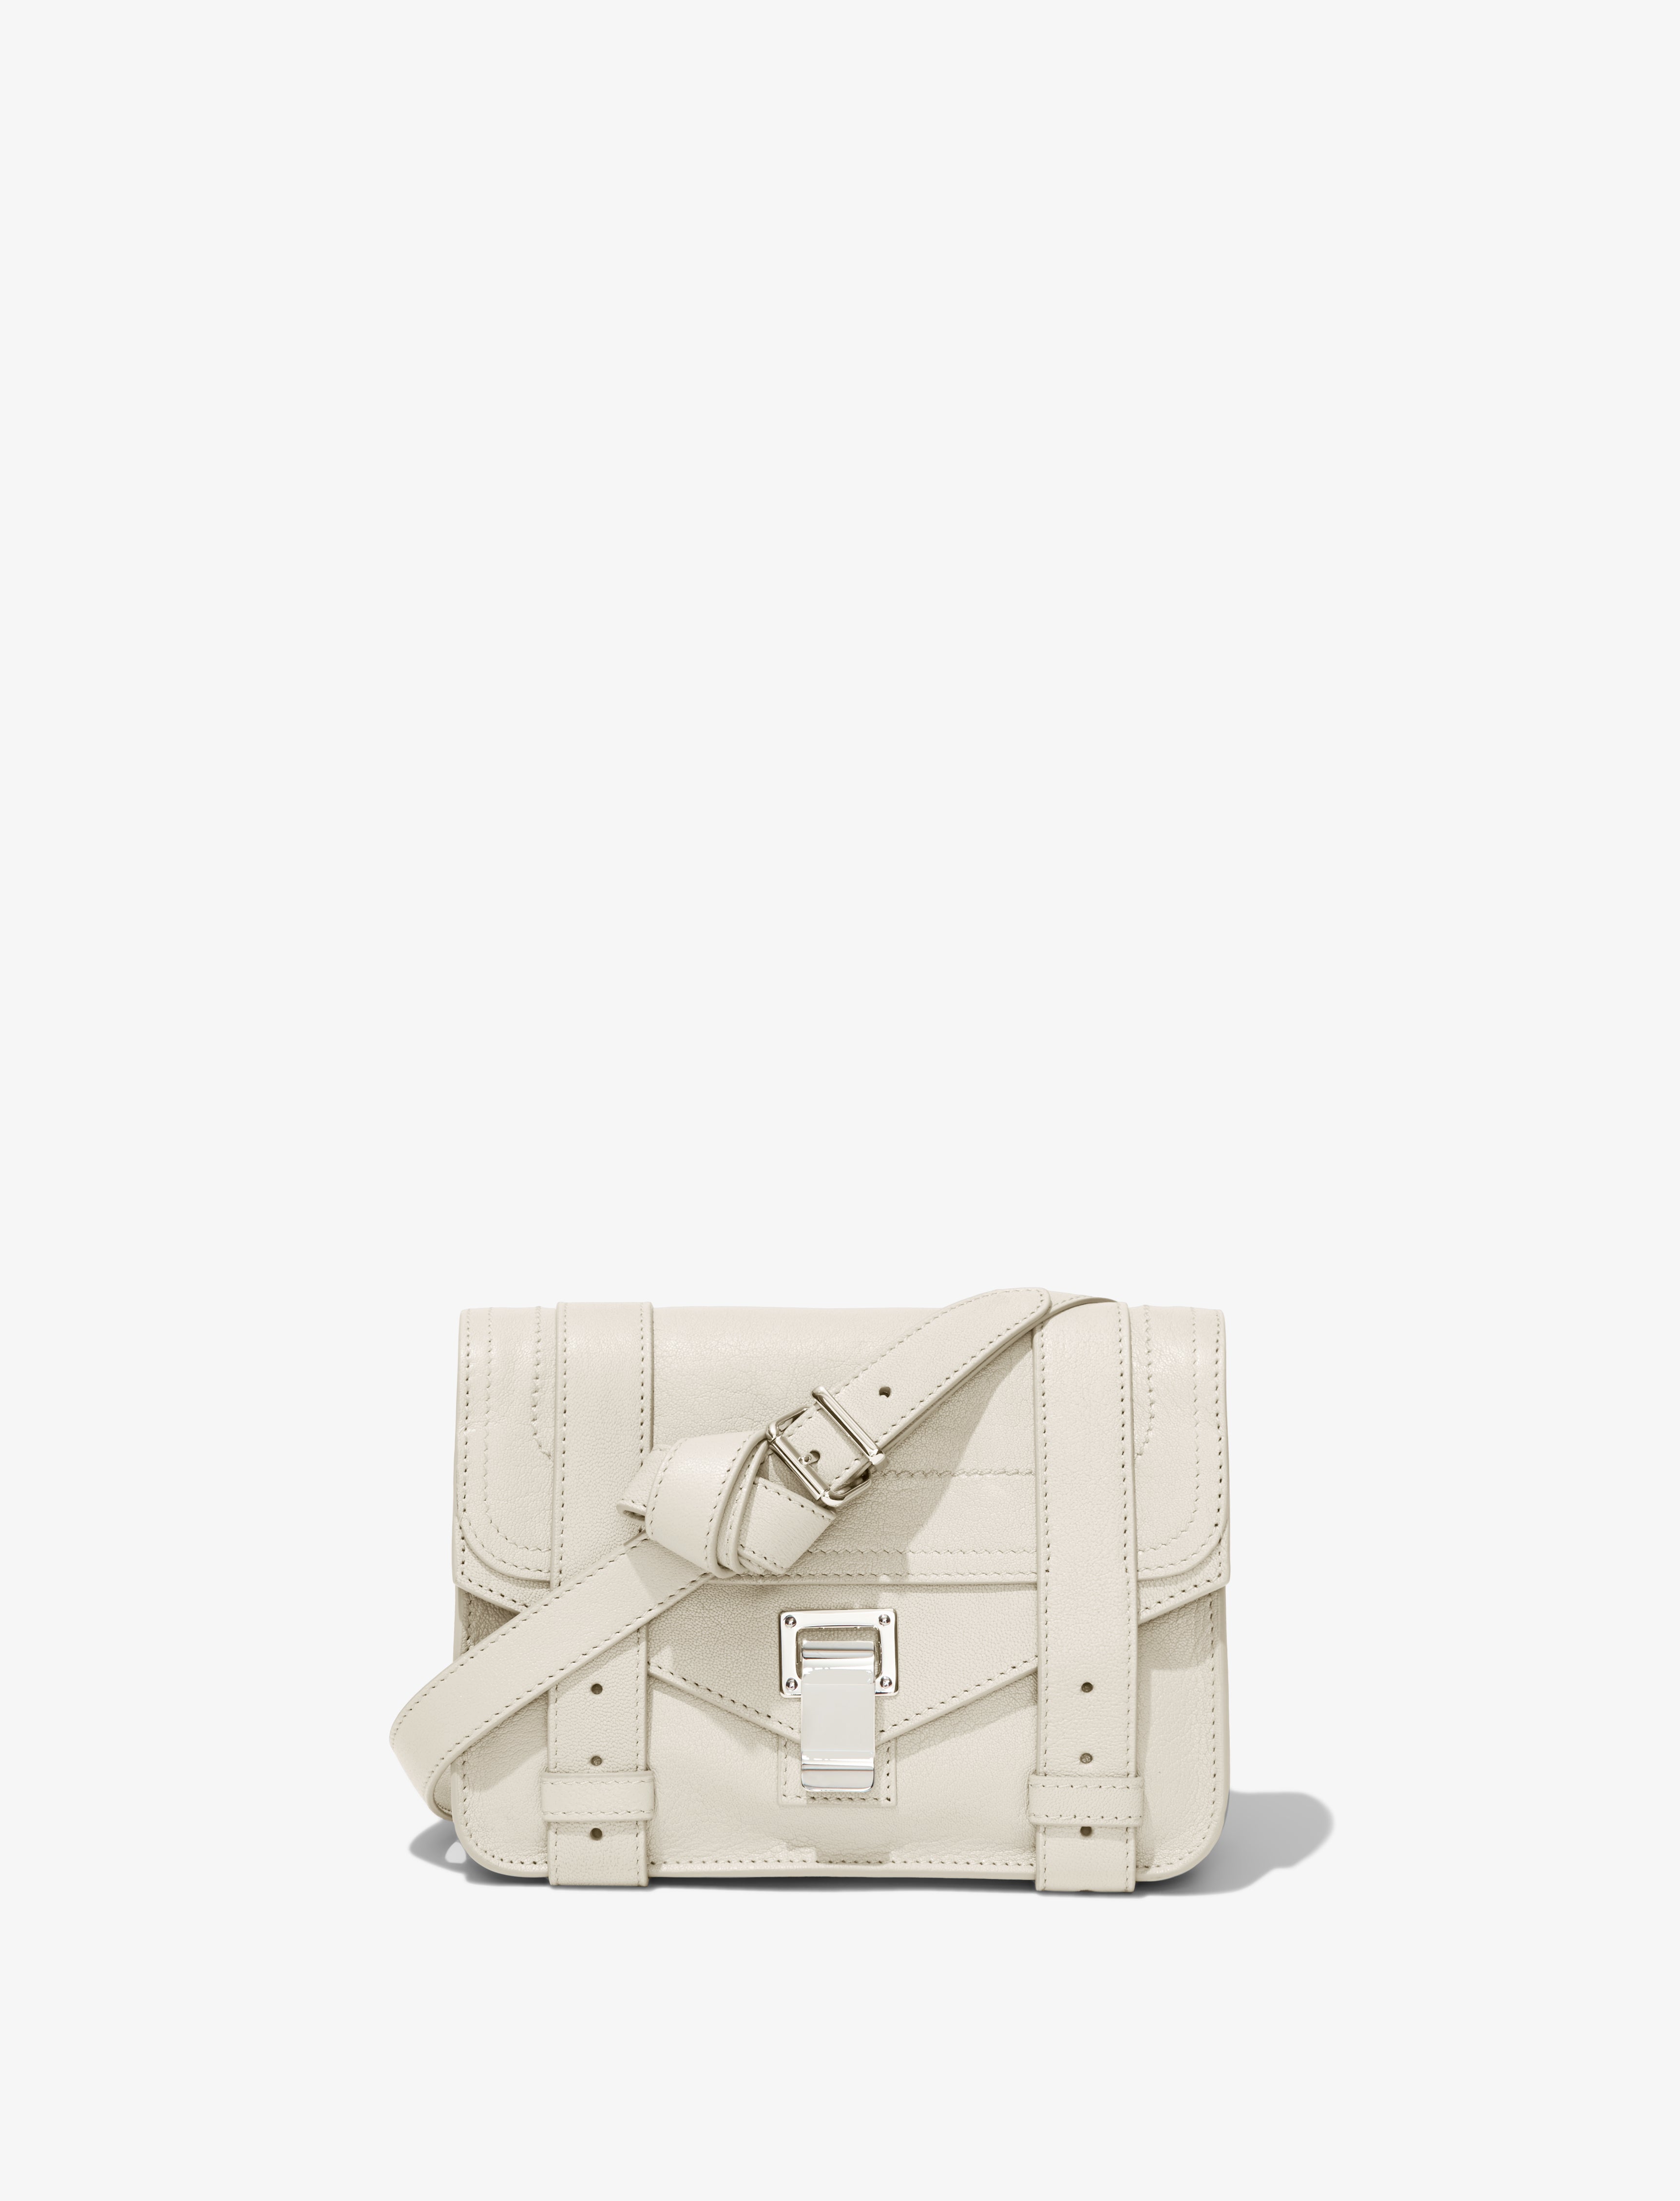 Ps1 tiny leather crossbody bag Proenza Schouler White in Leather - 35448801